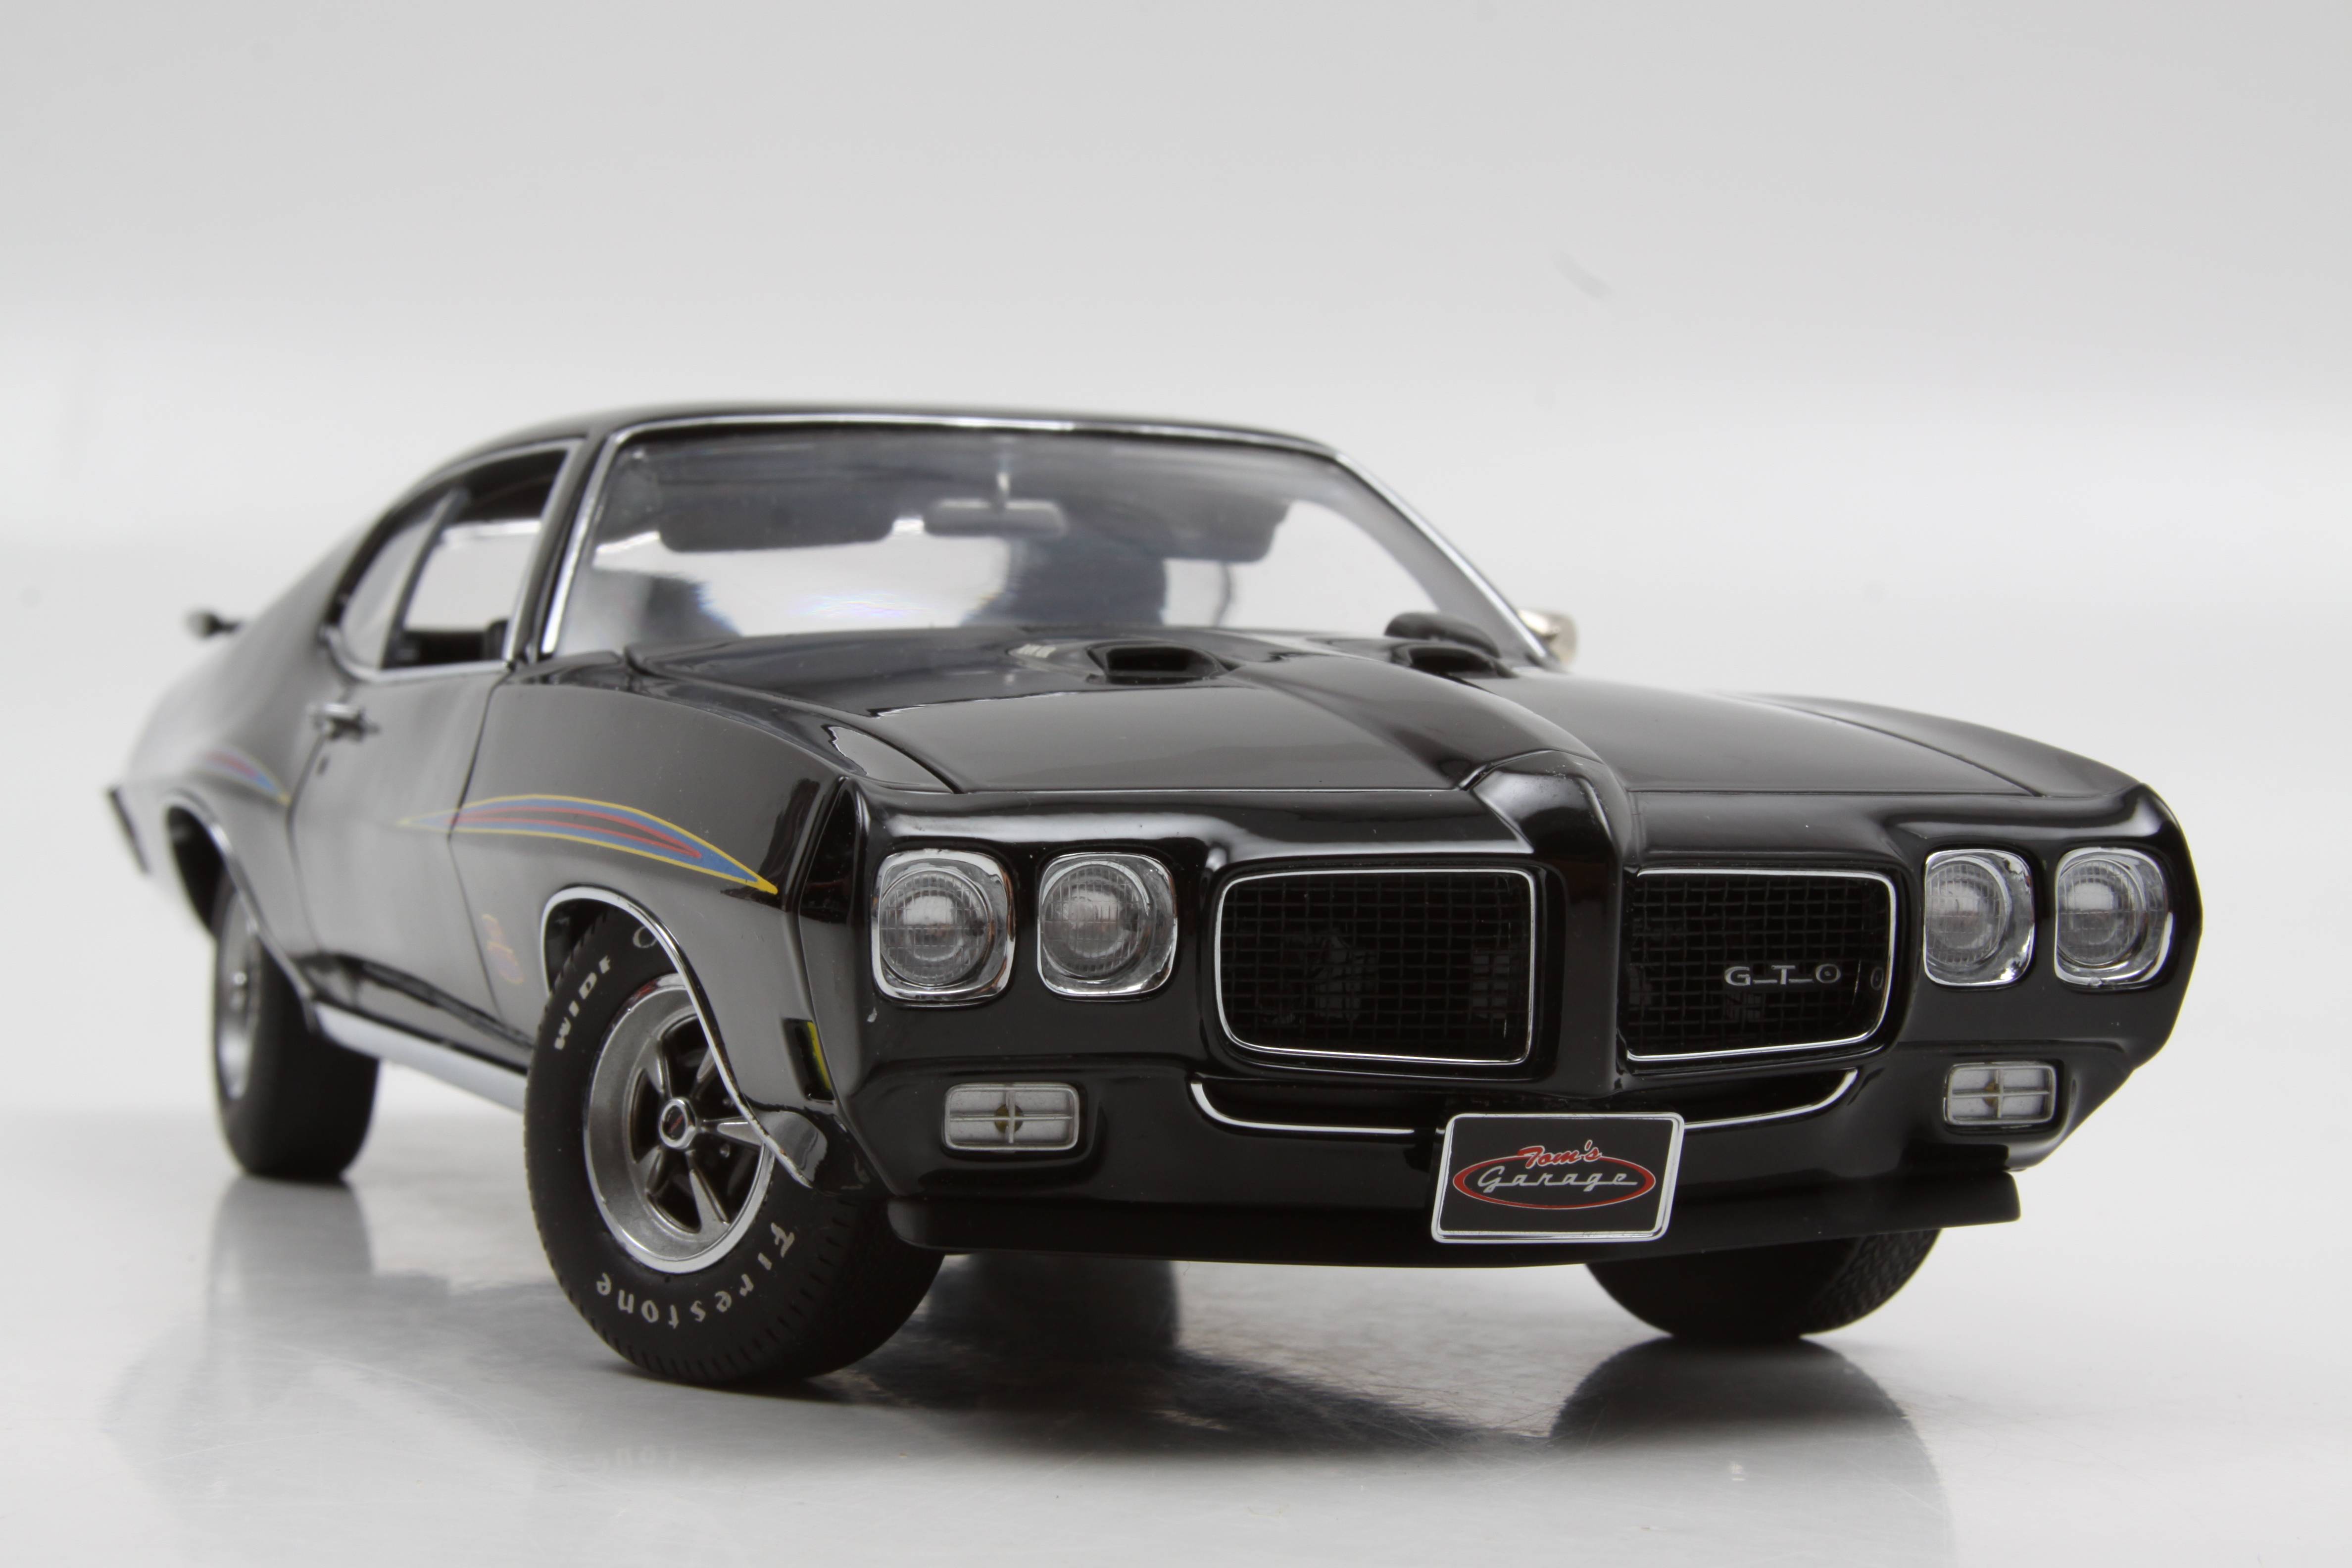 Pontiac GTO Judge Image. Picture and Videos